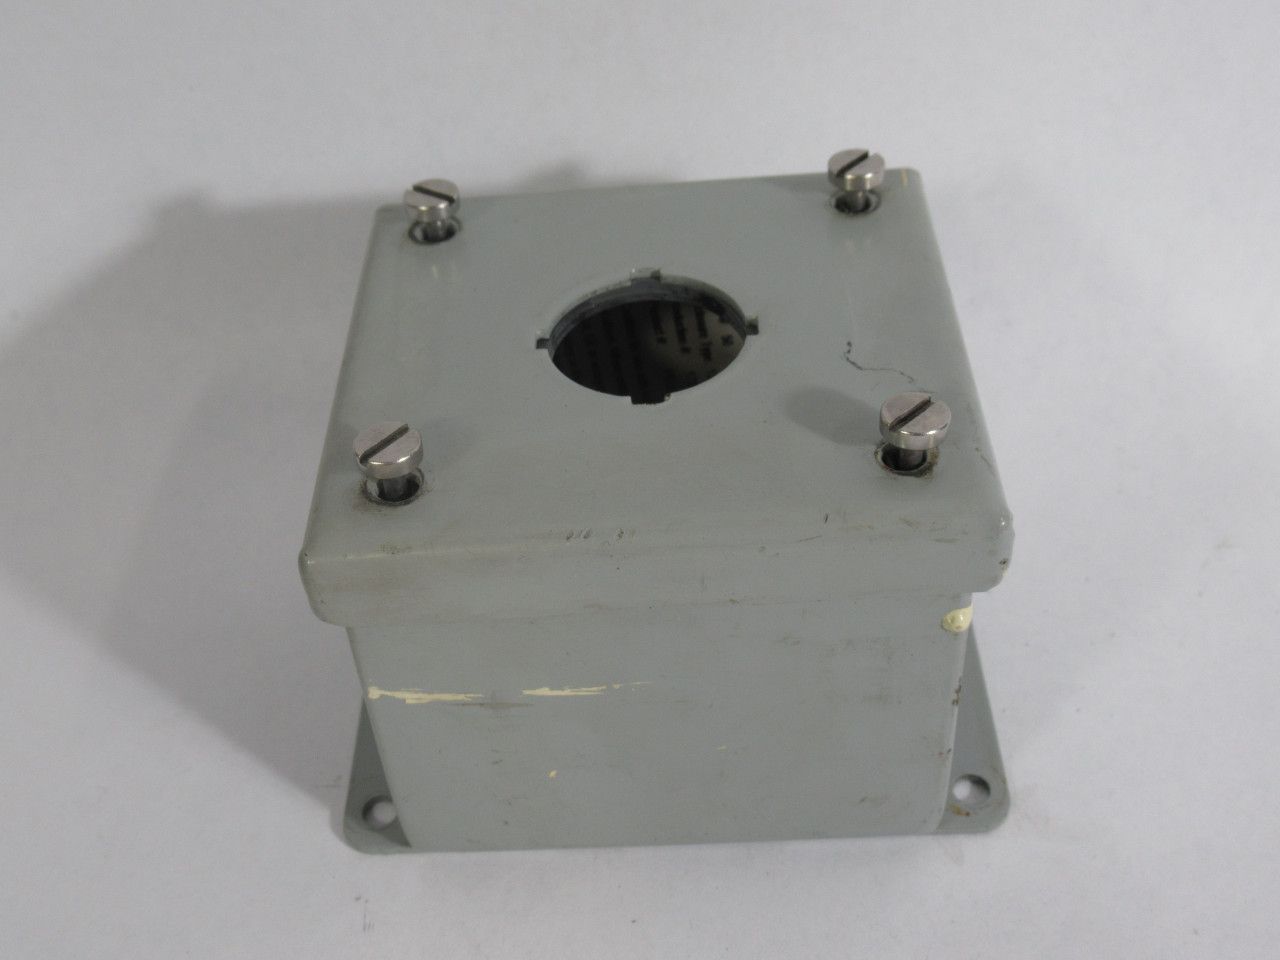 Ralston PB35-1 Push Button Enclosure 3-5/8x2-3/4" *1 Hole in Side* USED